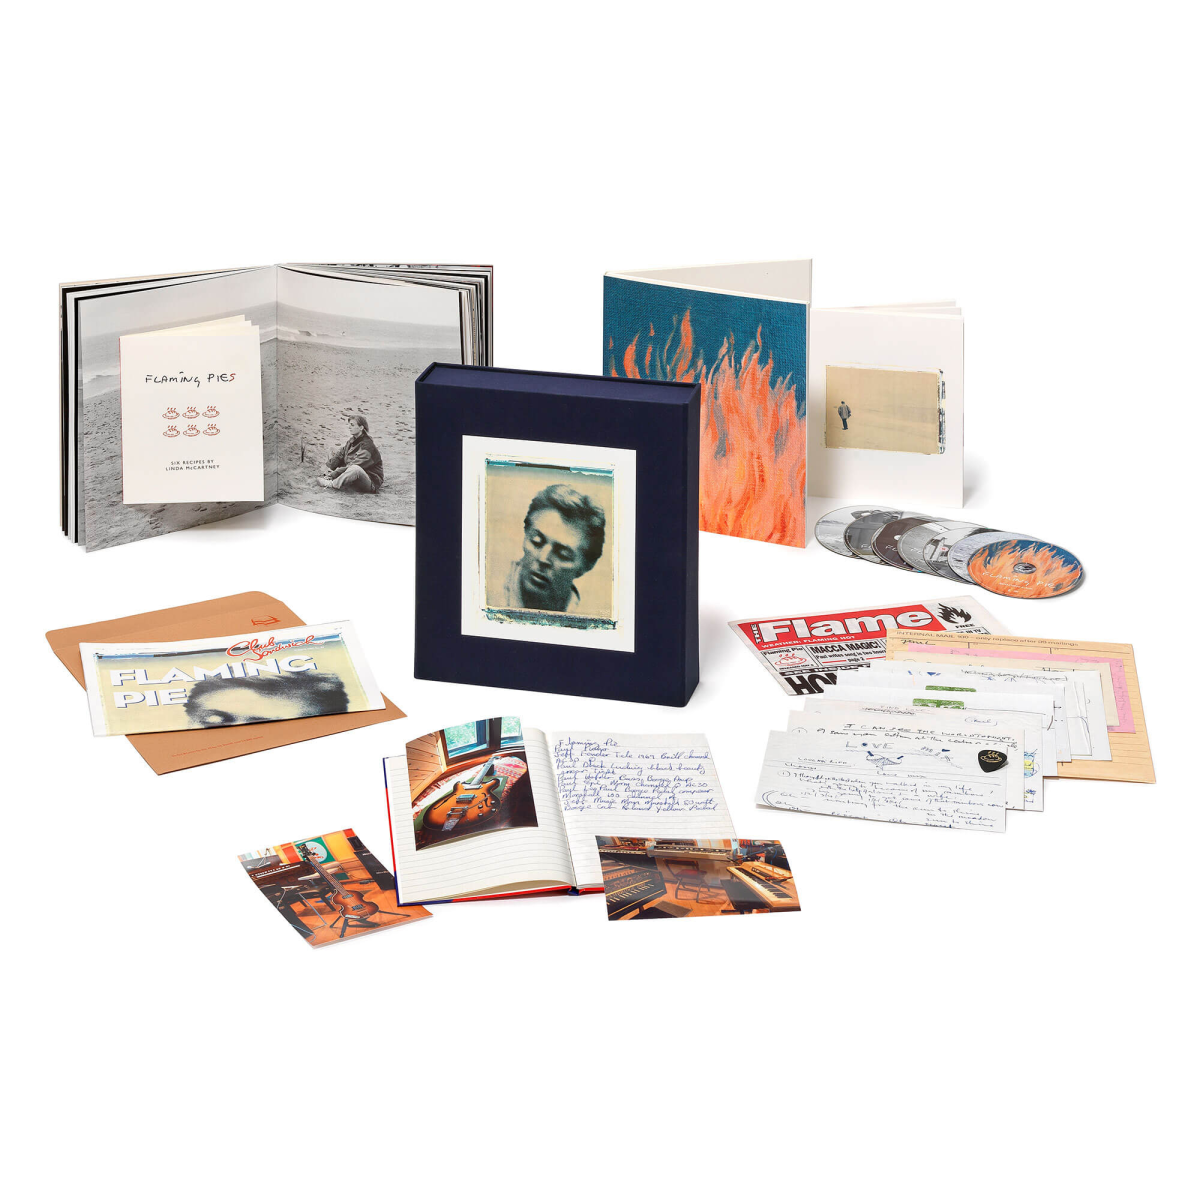 "Flaming Pie" Archive Deluxe Edition Box Set